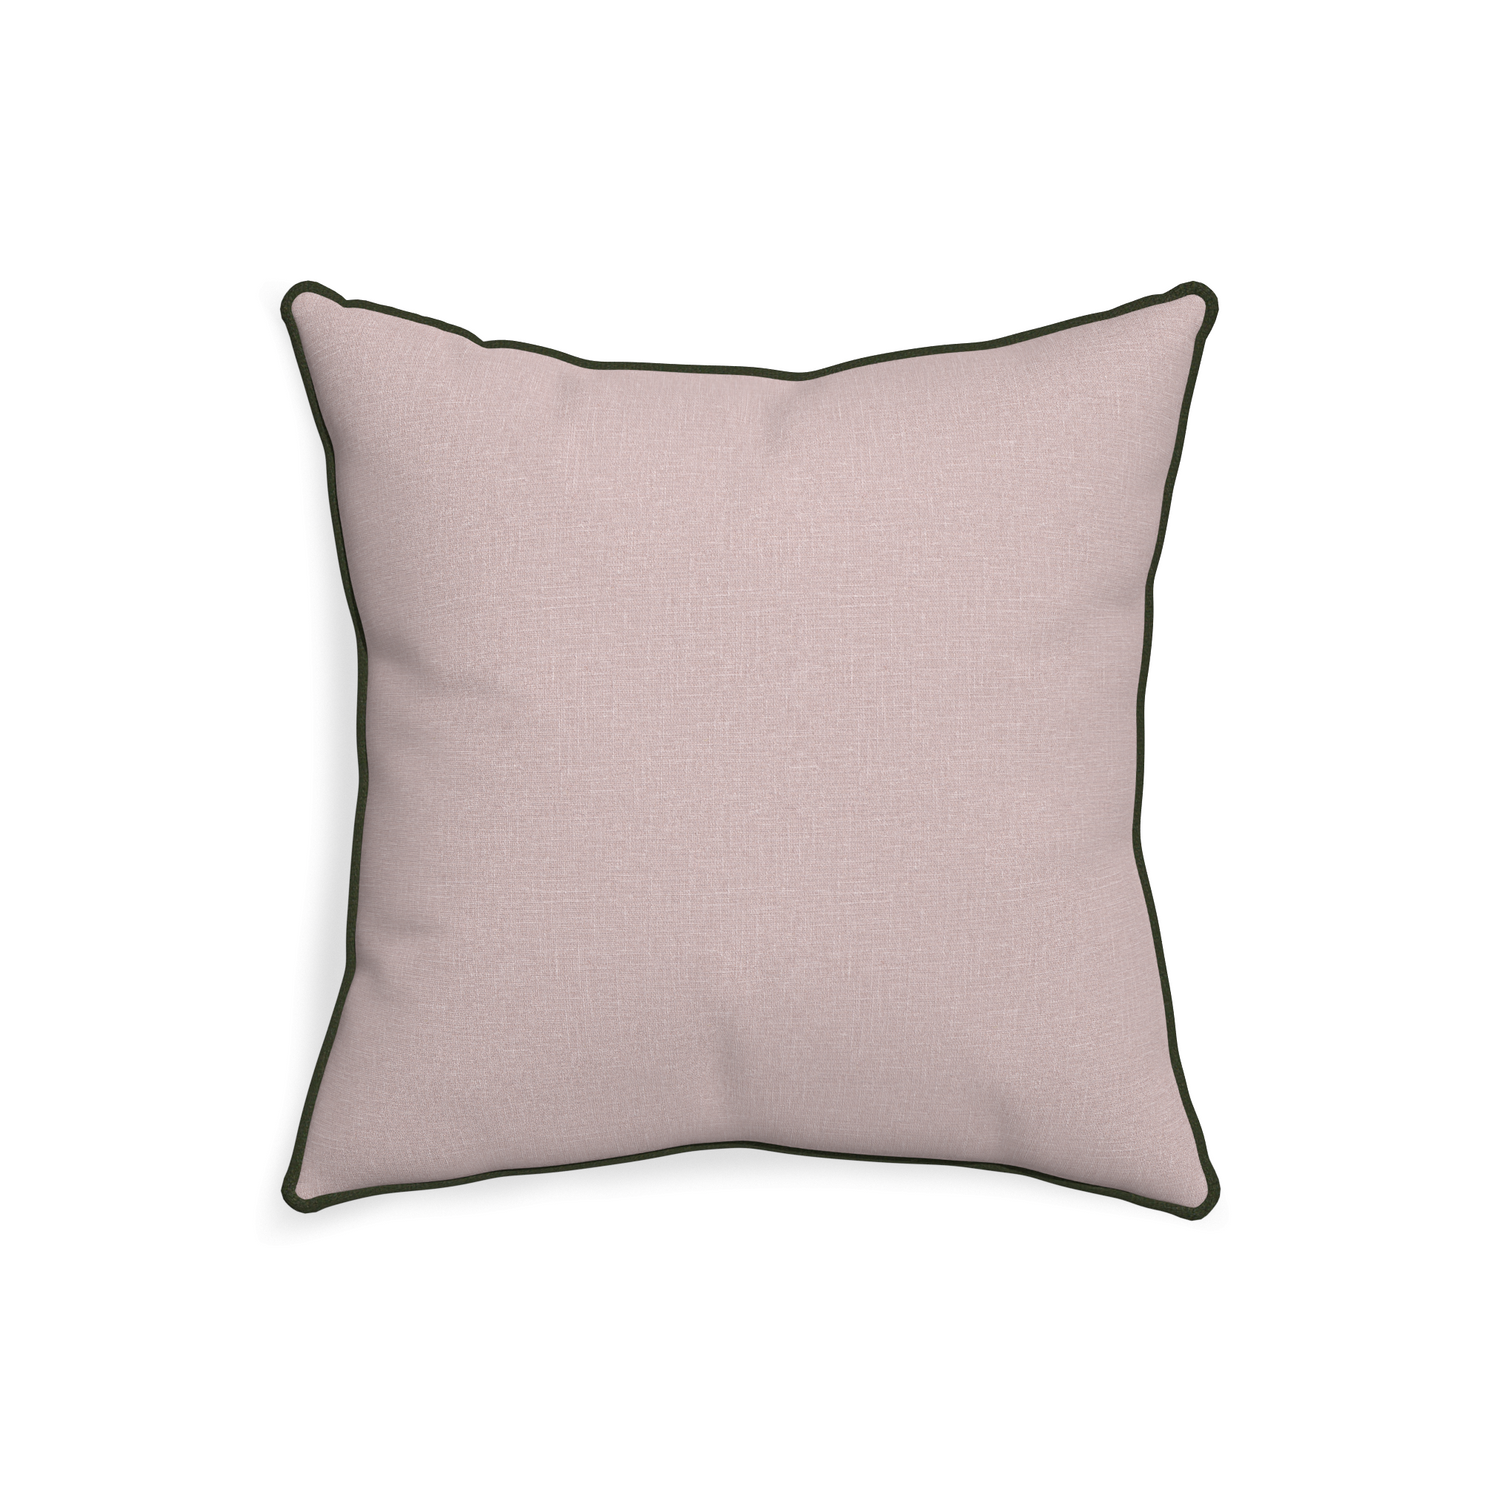 20-square orchid custom mauve pinkpillow with f piping on white background